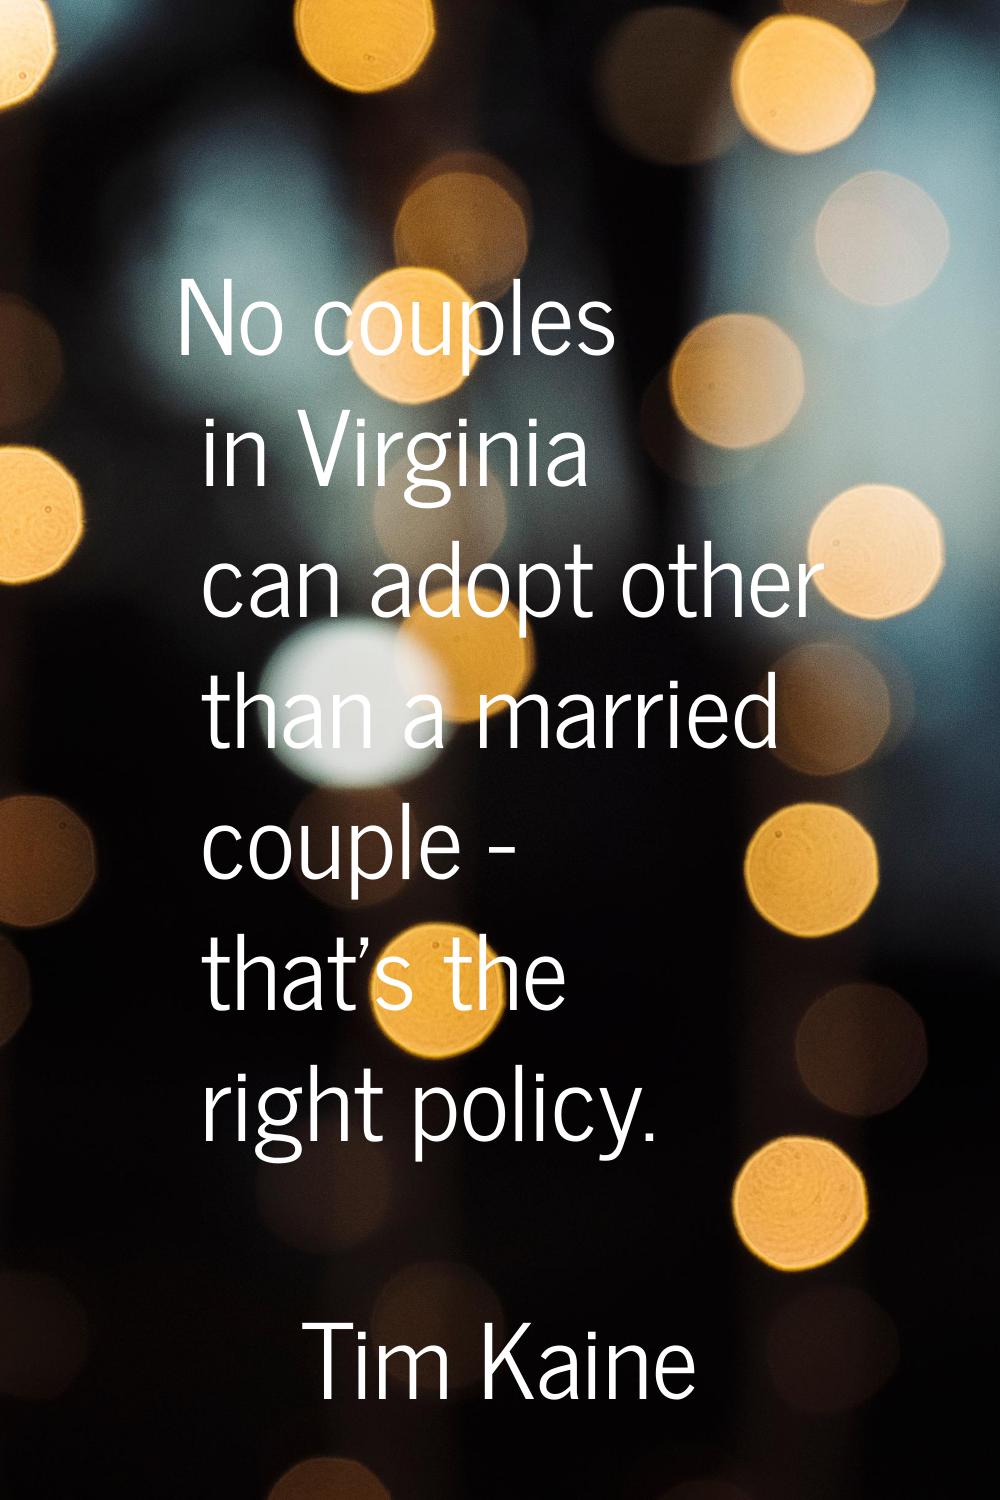 No couples in Virginia can adopt other than a married couple - that's the right policy.